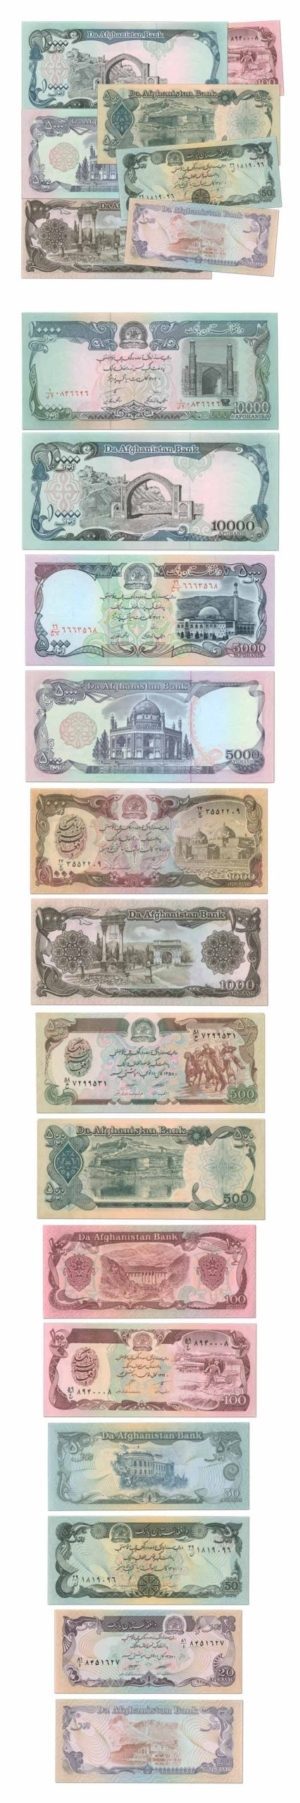 Afghanistan-Set of 7 Banknotes-20 to 10